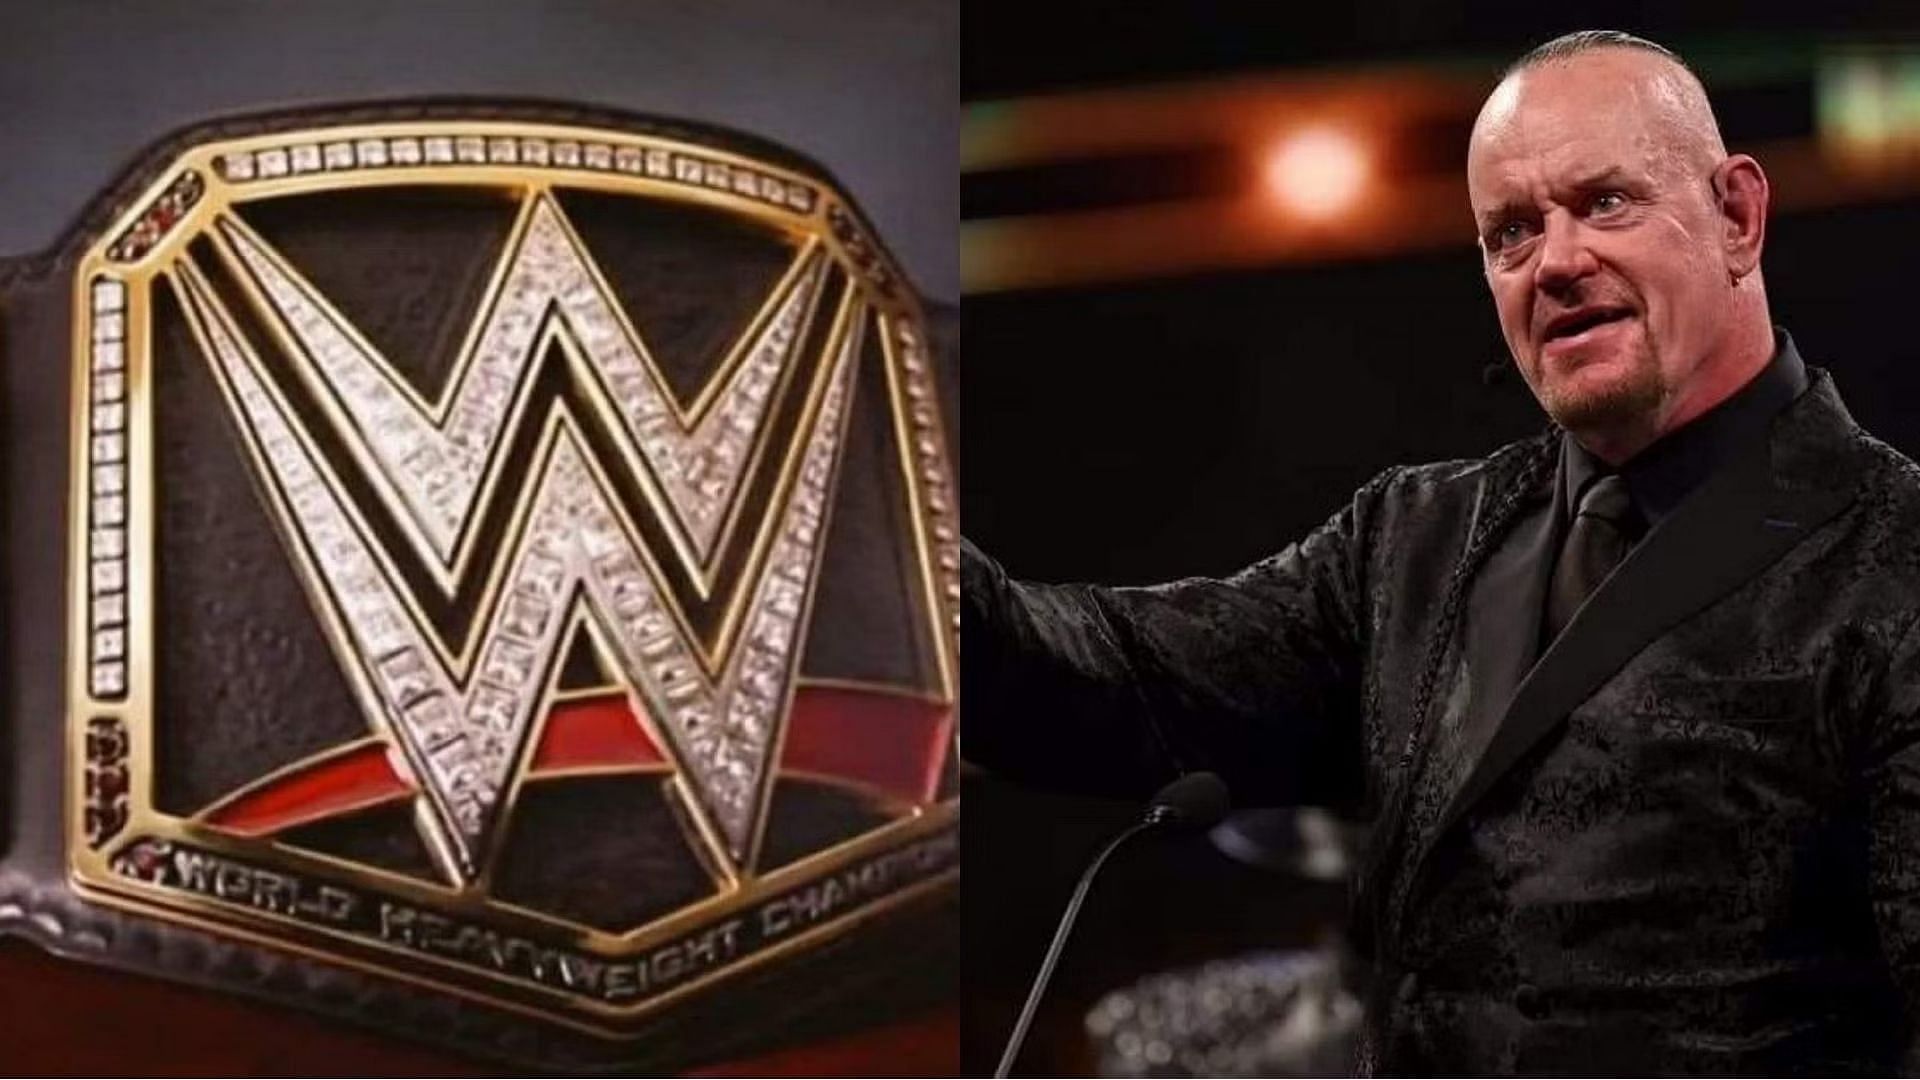 Former WWE Champion claims he and The Undertaker had "some of the greatest matches of all time"